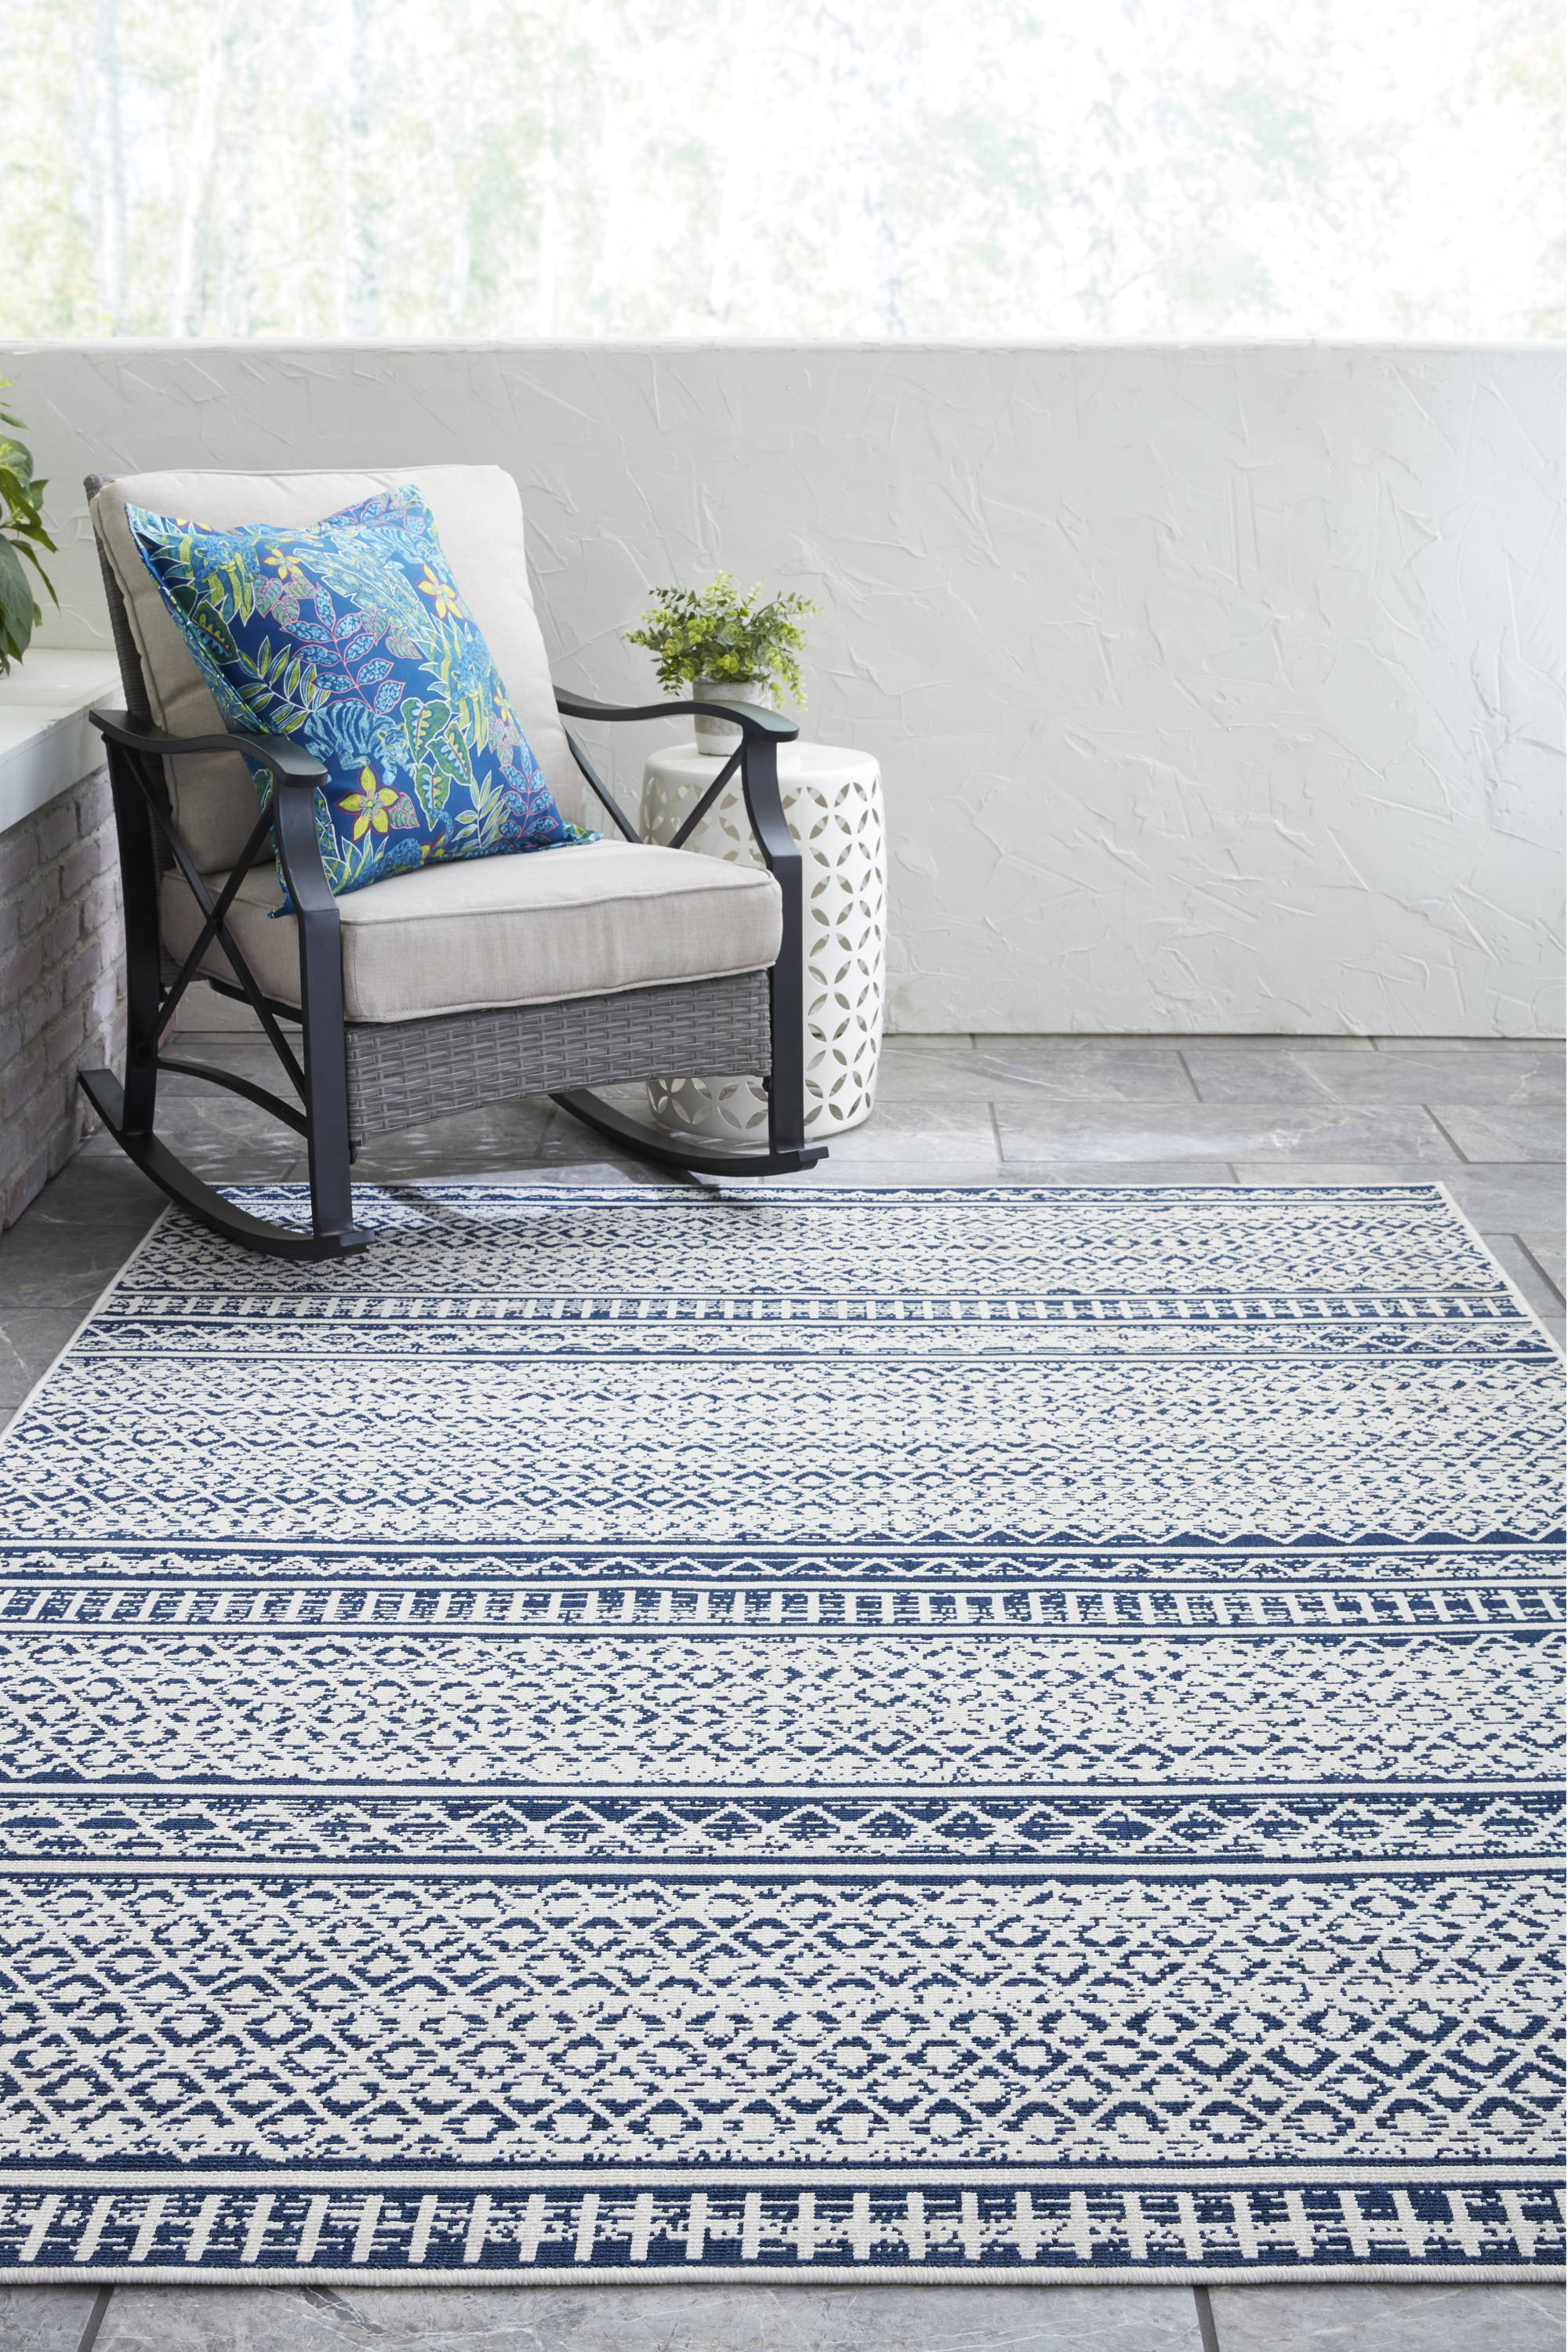 Style Selections Blue Unnamed Rug 5 X 7, Blue And Green Outdoor Rug 5 215 70r15